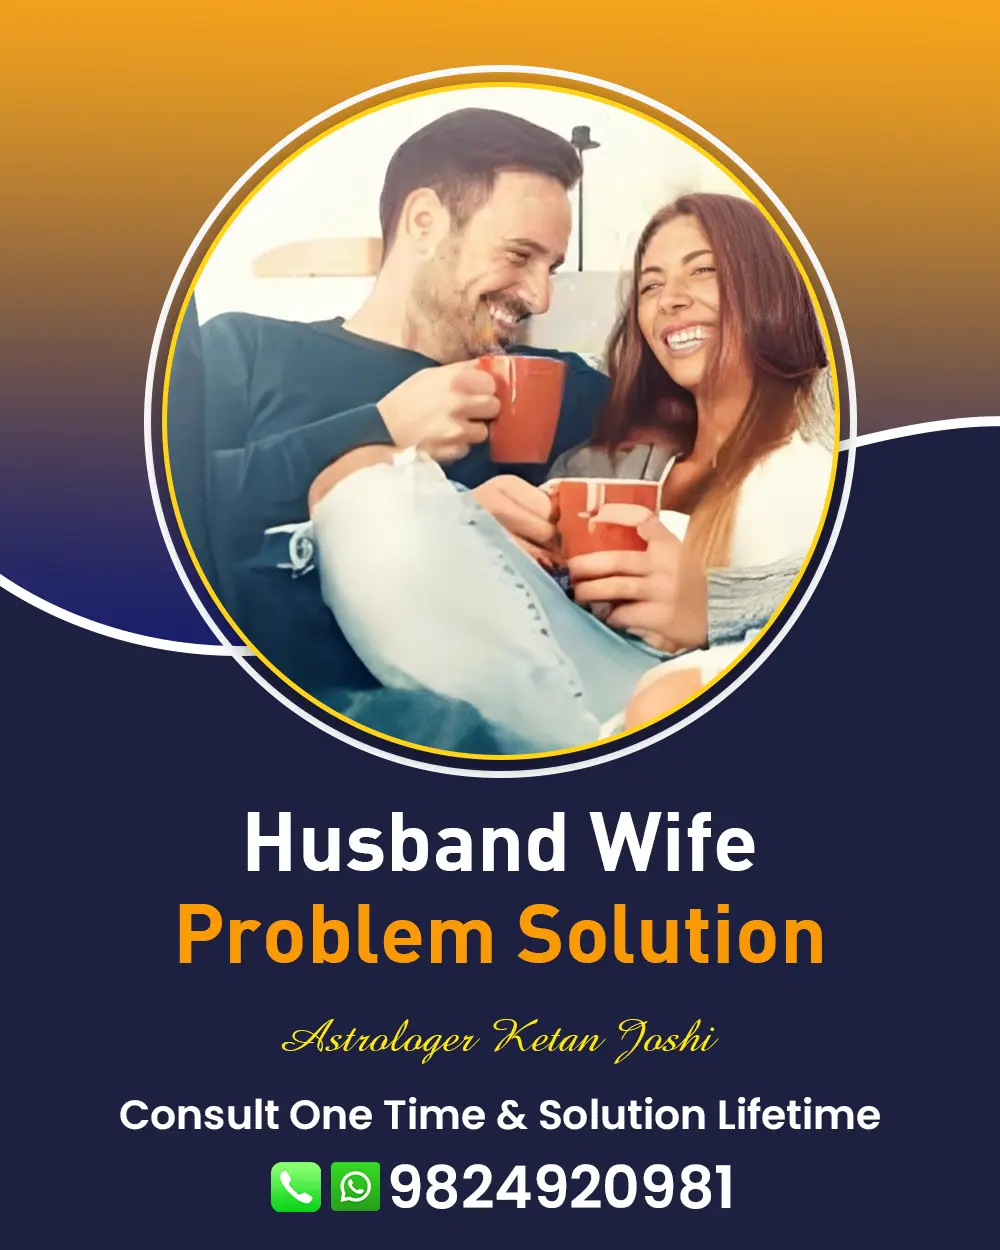 Husband Wife Problem Solution in dhanera